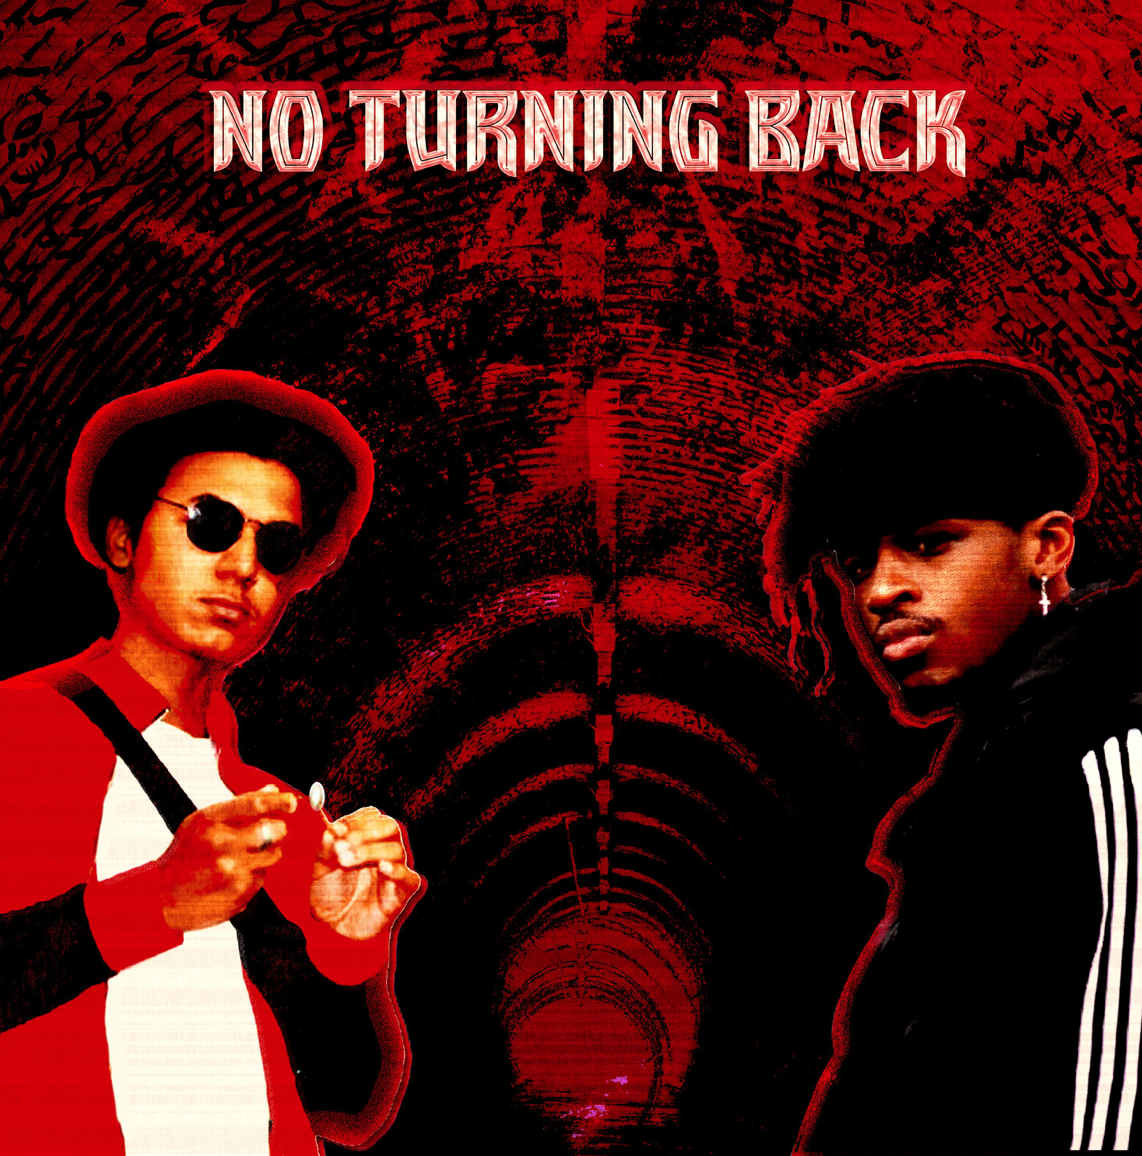 Woozybeatz brought his unique style of DubWave back to the airwaves with ‘No Turning’ Back', featuring GOLDEN G.